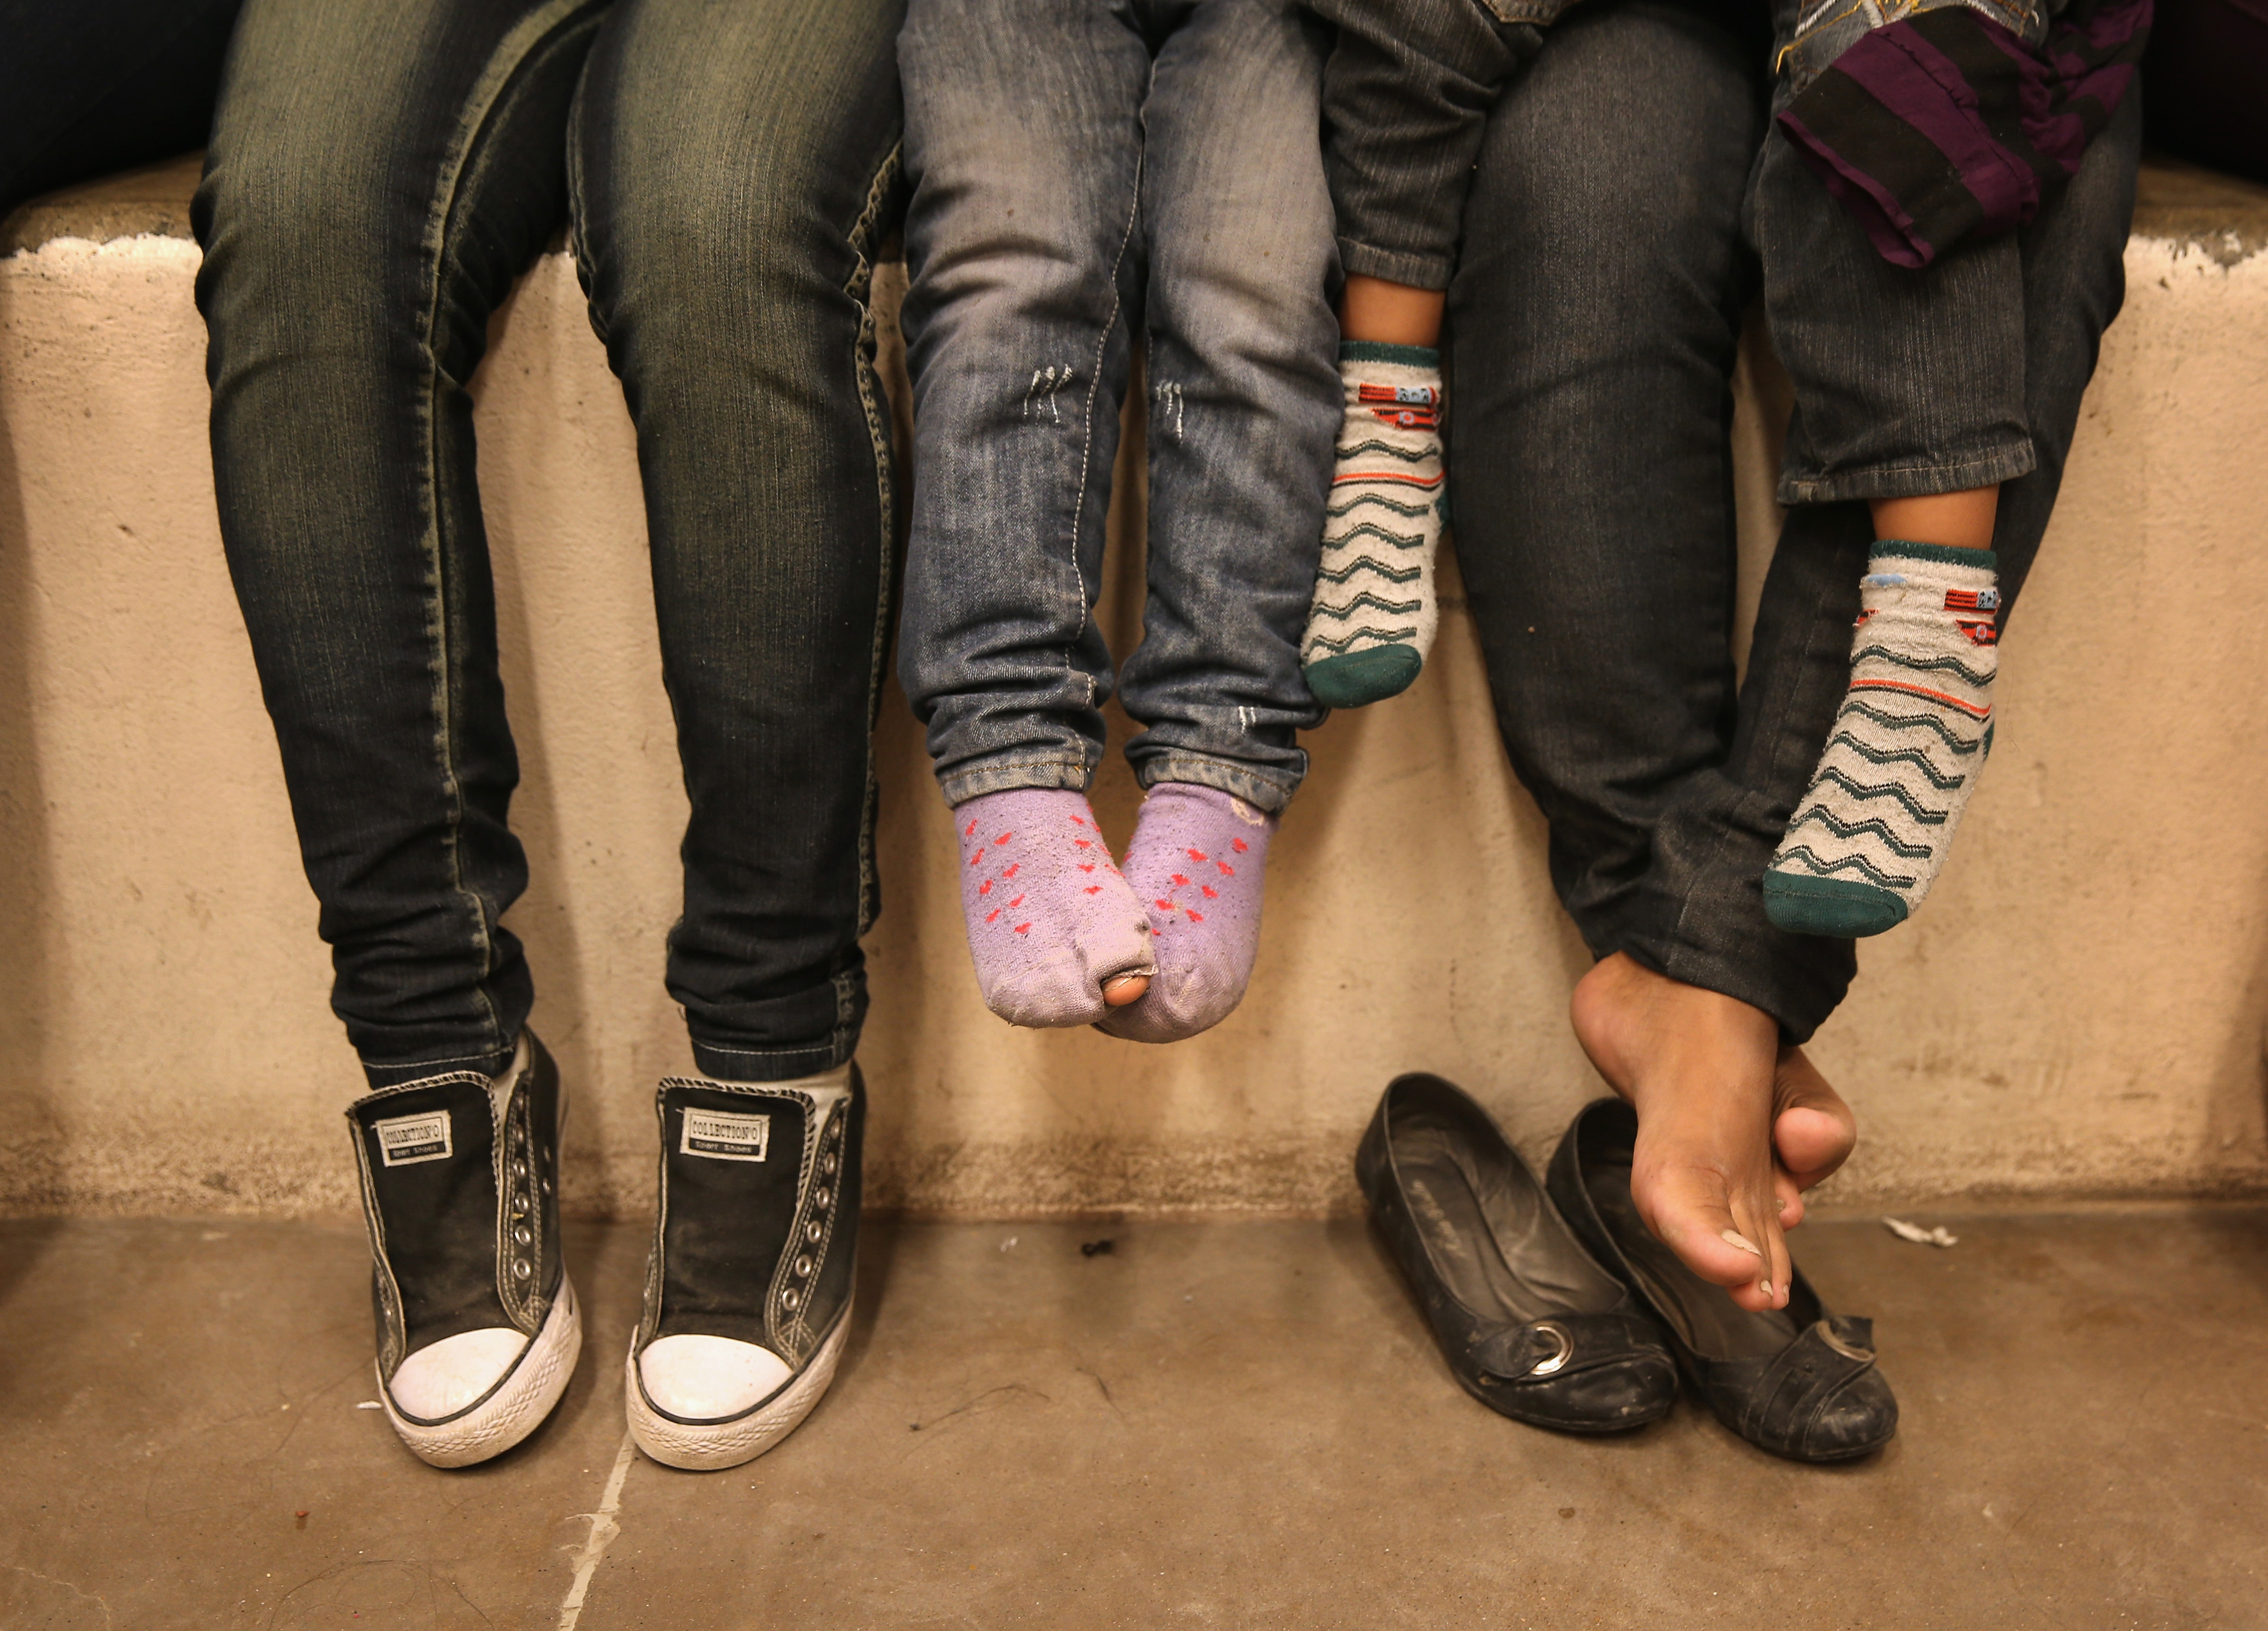 Women and children sit in a holding cell at a U.S. Border Patrol processing center after being detained by agents near the U.S.-Mexico border near McAllen, Texas on Sept. 8, 2014. (John Moore—Getty Images)